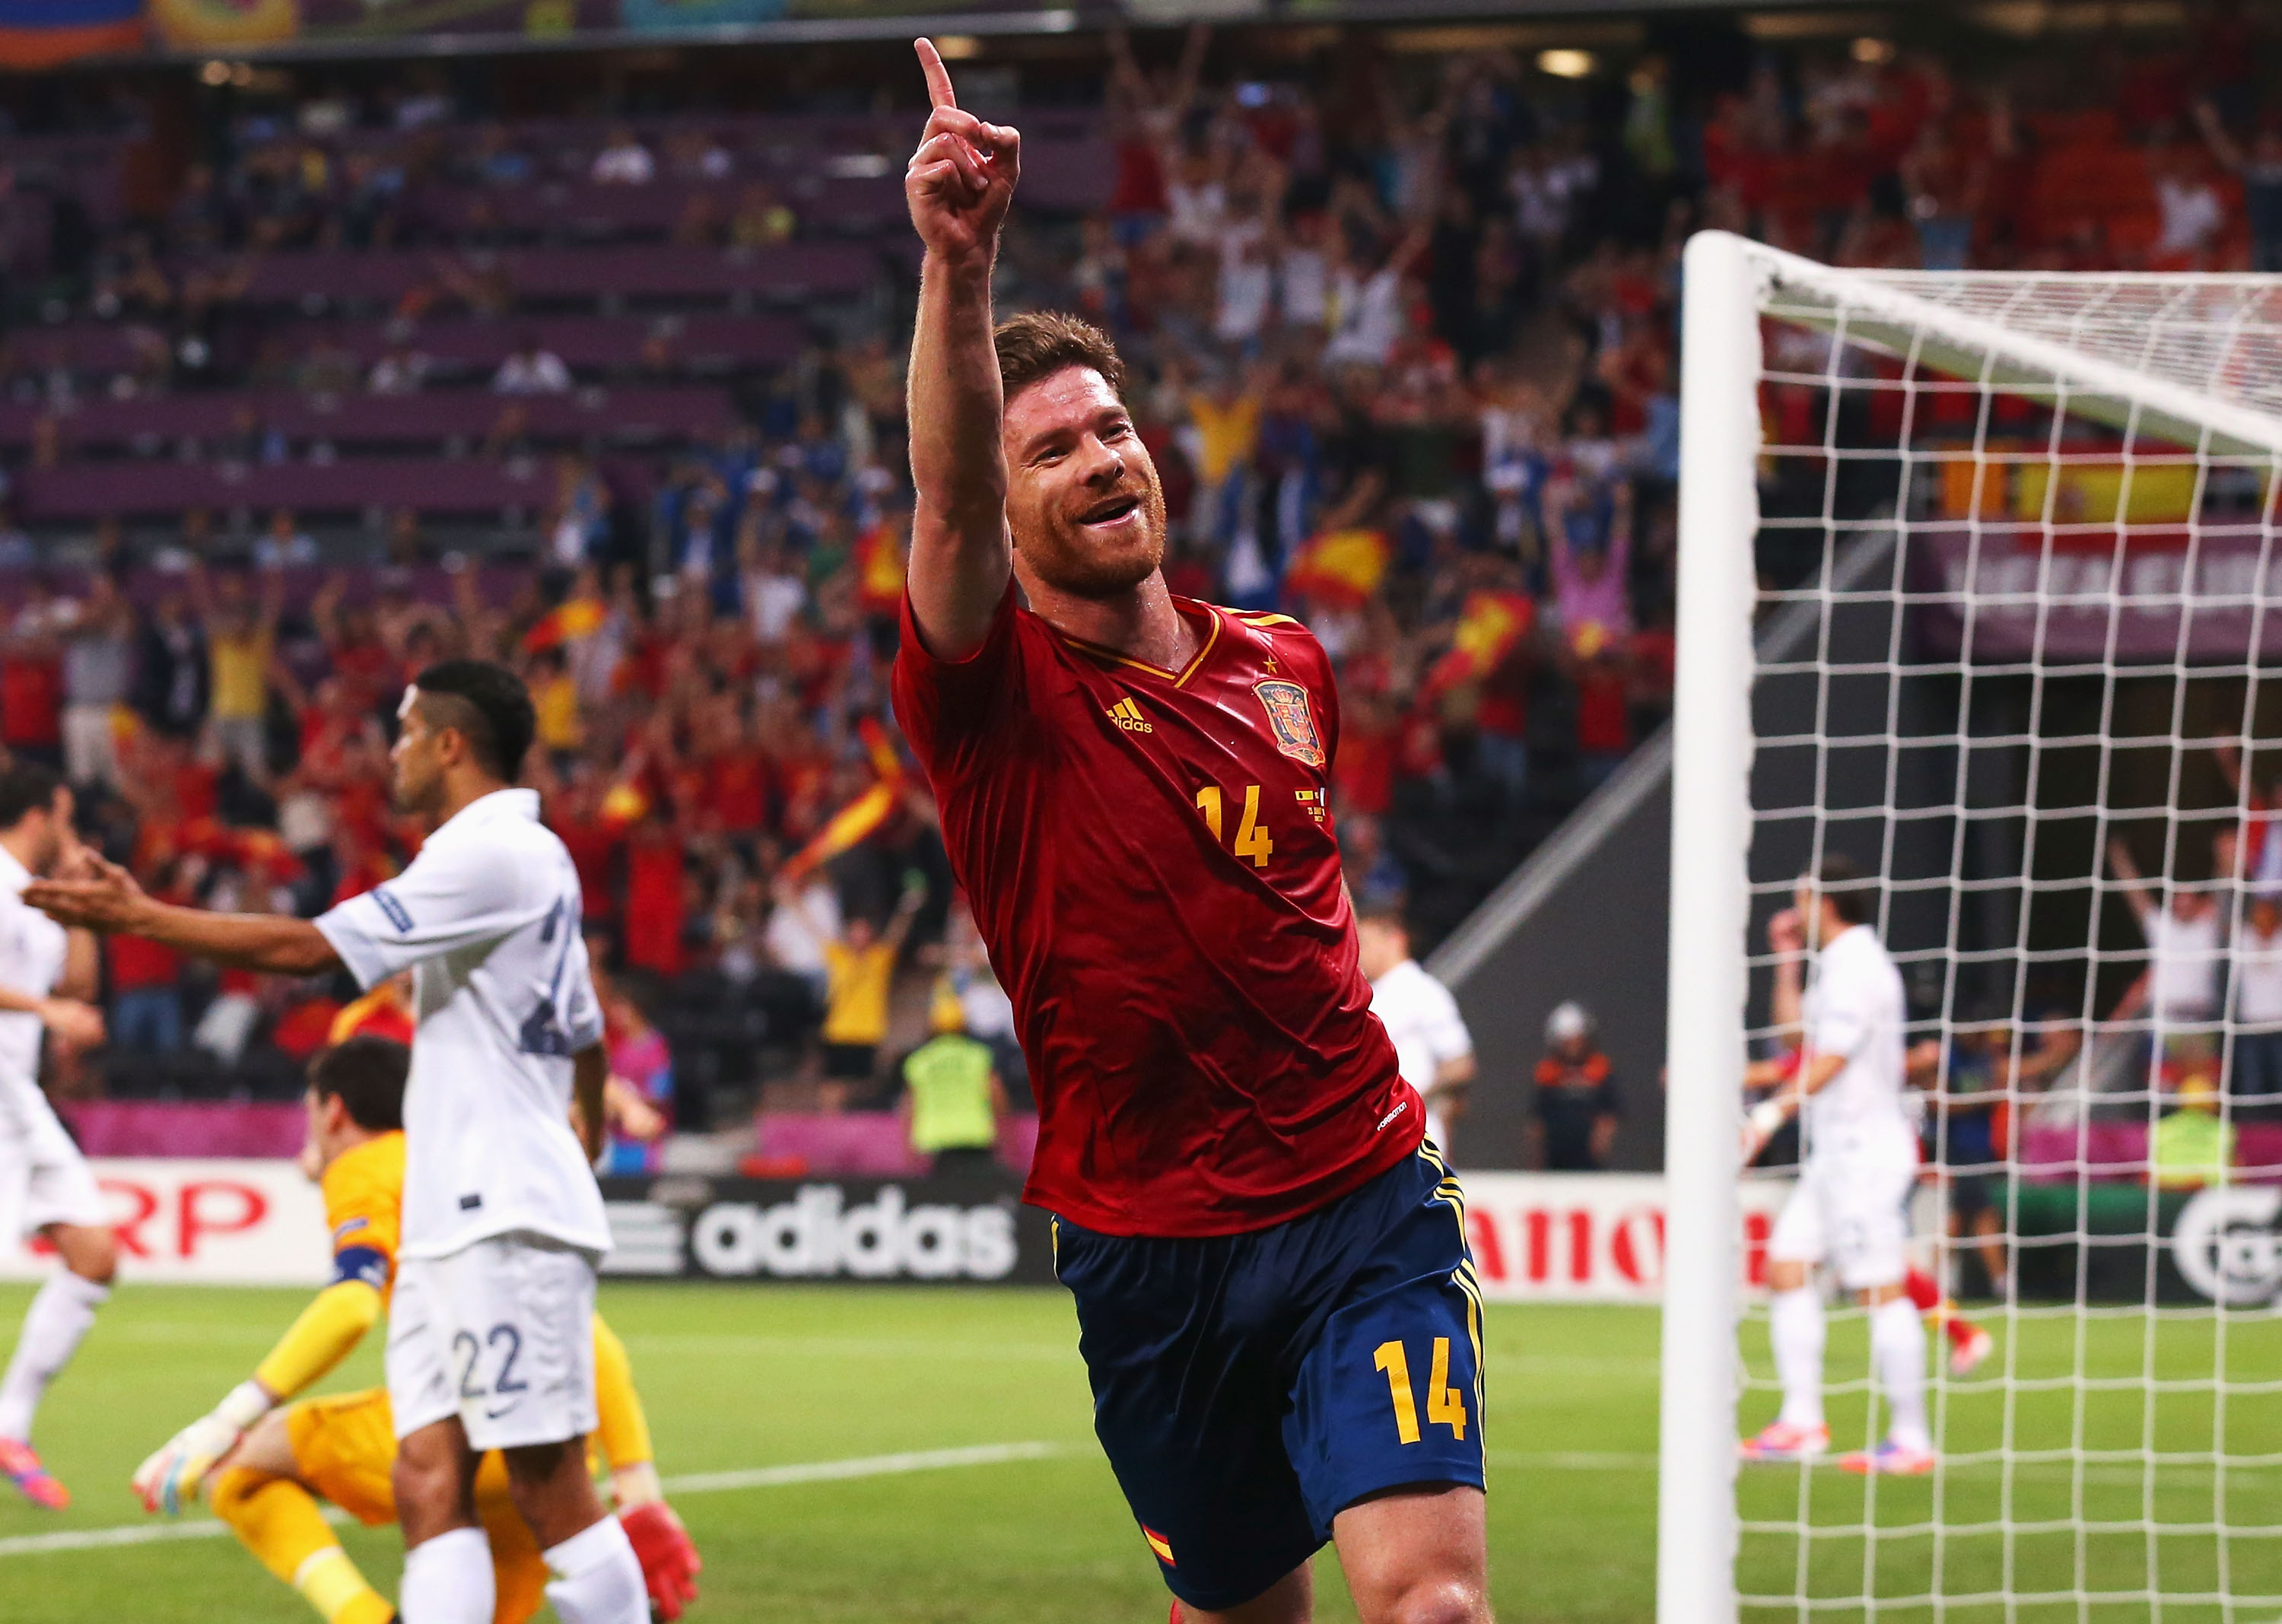 Xabi Alonso celebrates after scoring for Spain against France at Euro 2012.